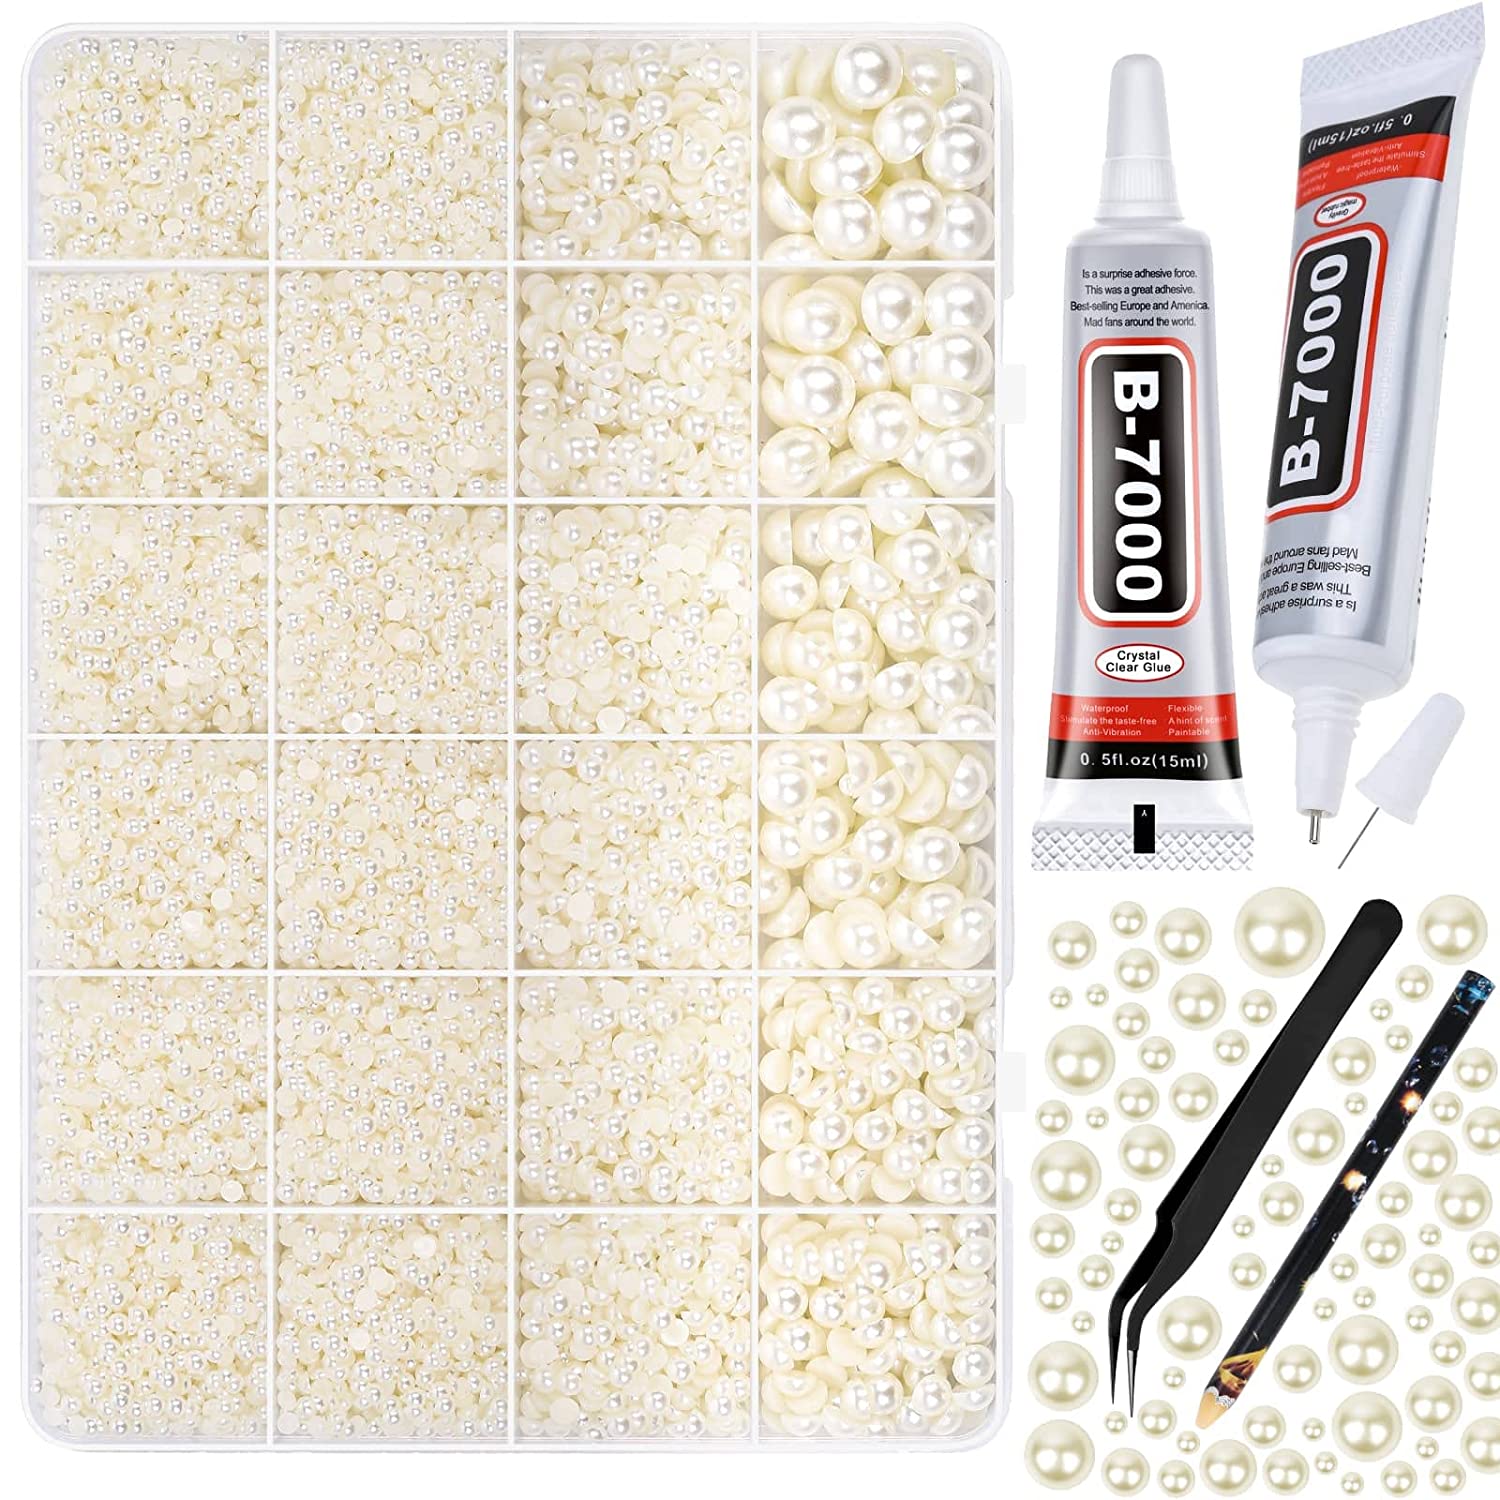 B7000 Clear Glue Bedazzler Kit with Rhinestones, 4013PCS